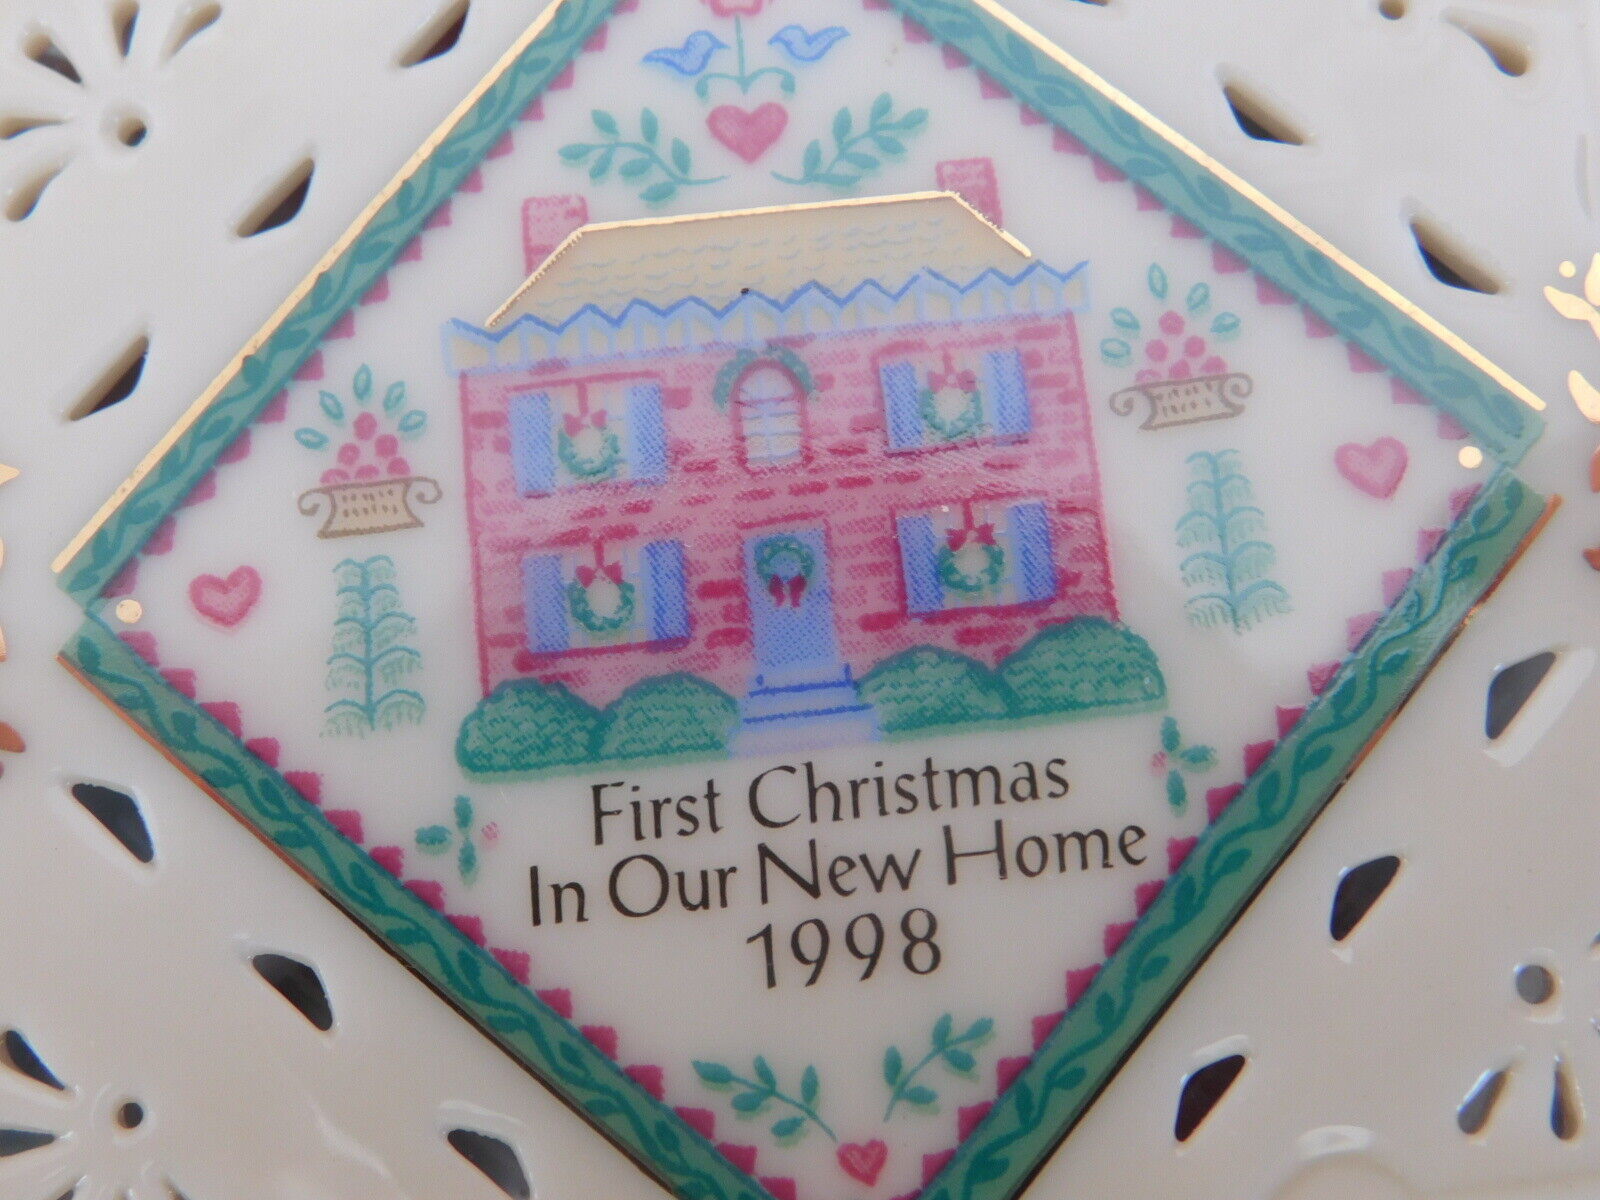 Lenox 1998 Christmas Ornament First Christmas In Our New Home - In Box